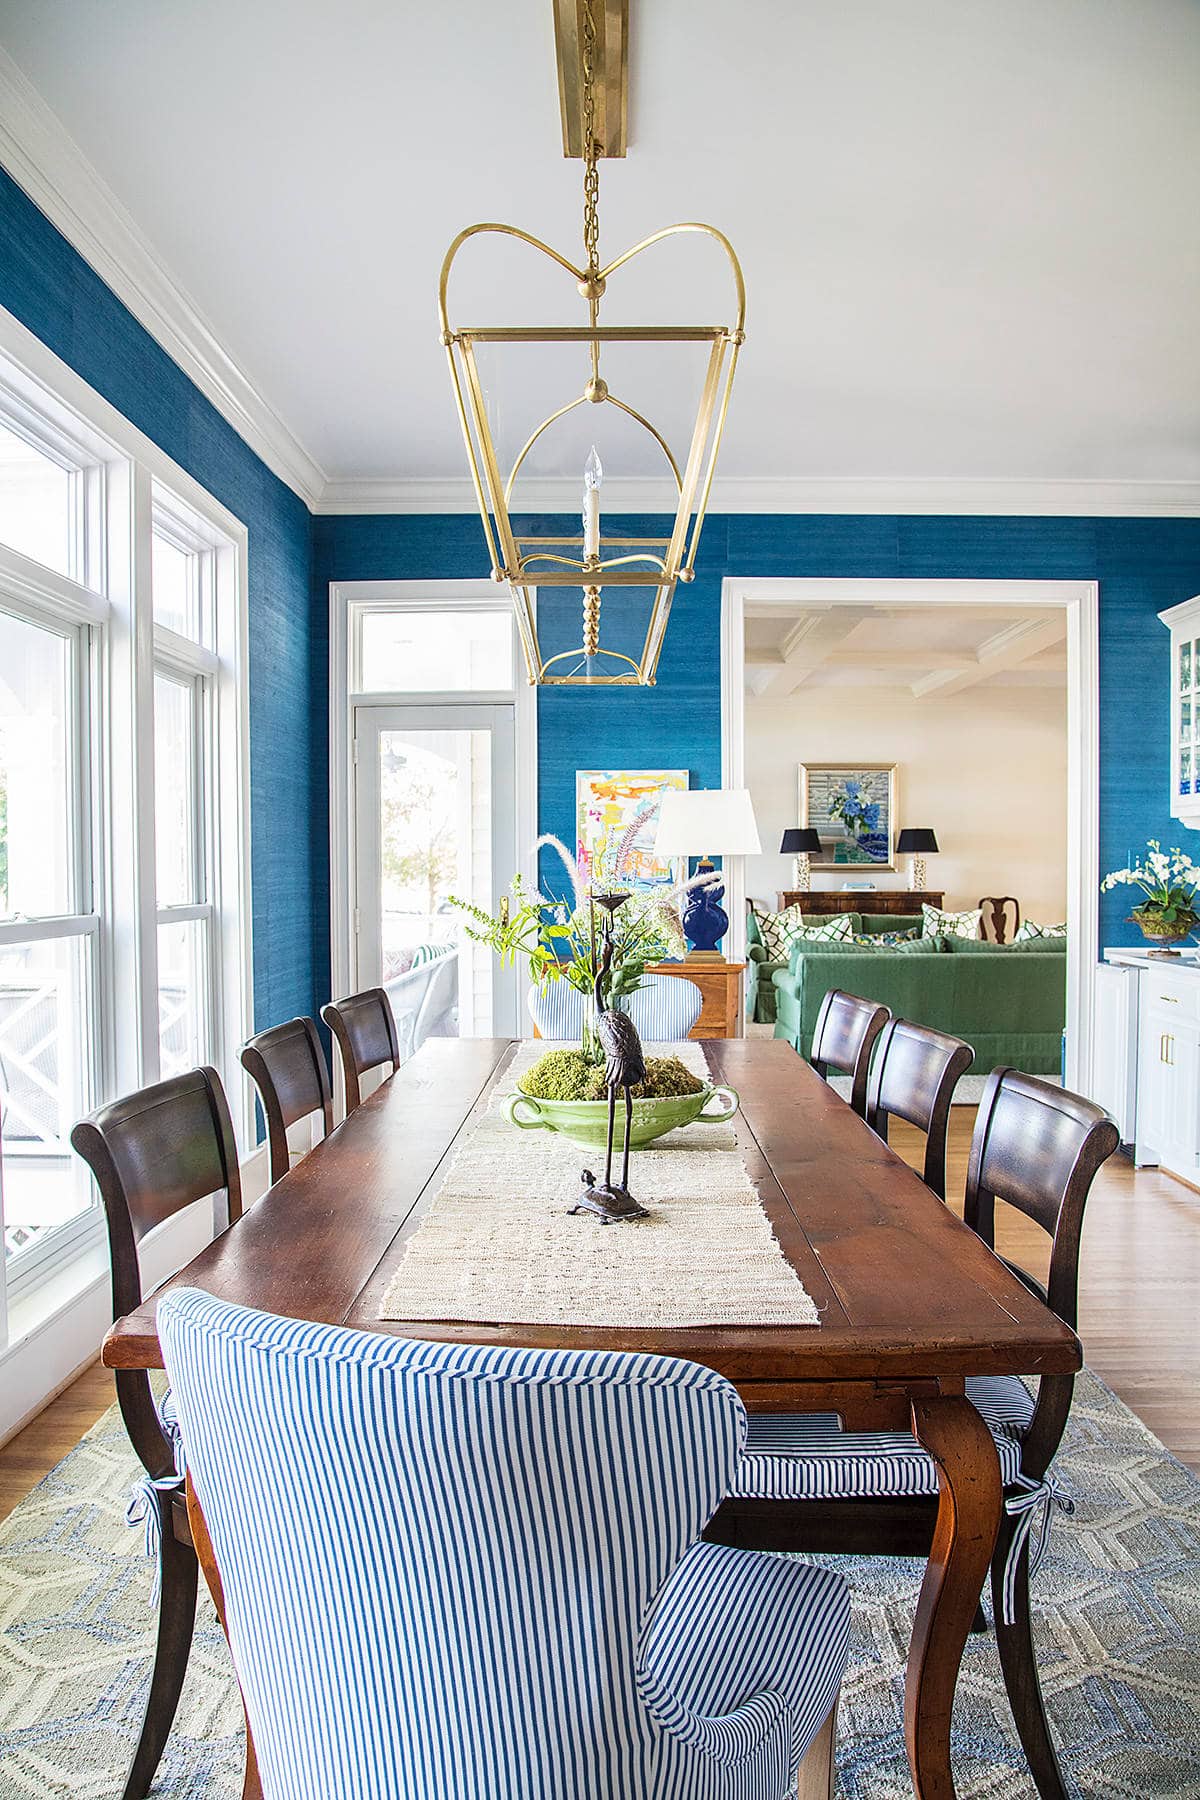 Home tour: Traditional coastal dining room, large wood table, blue decor accents, inviting and stylish ambiance